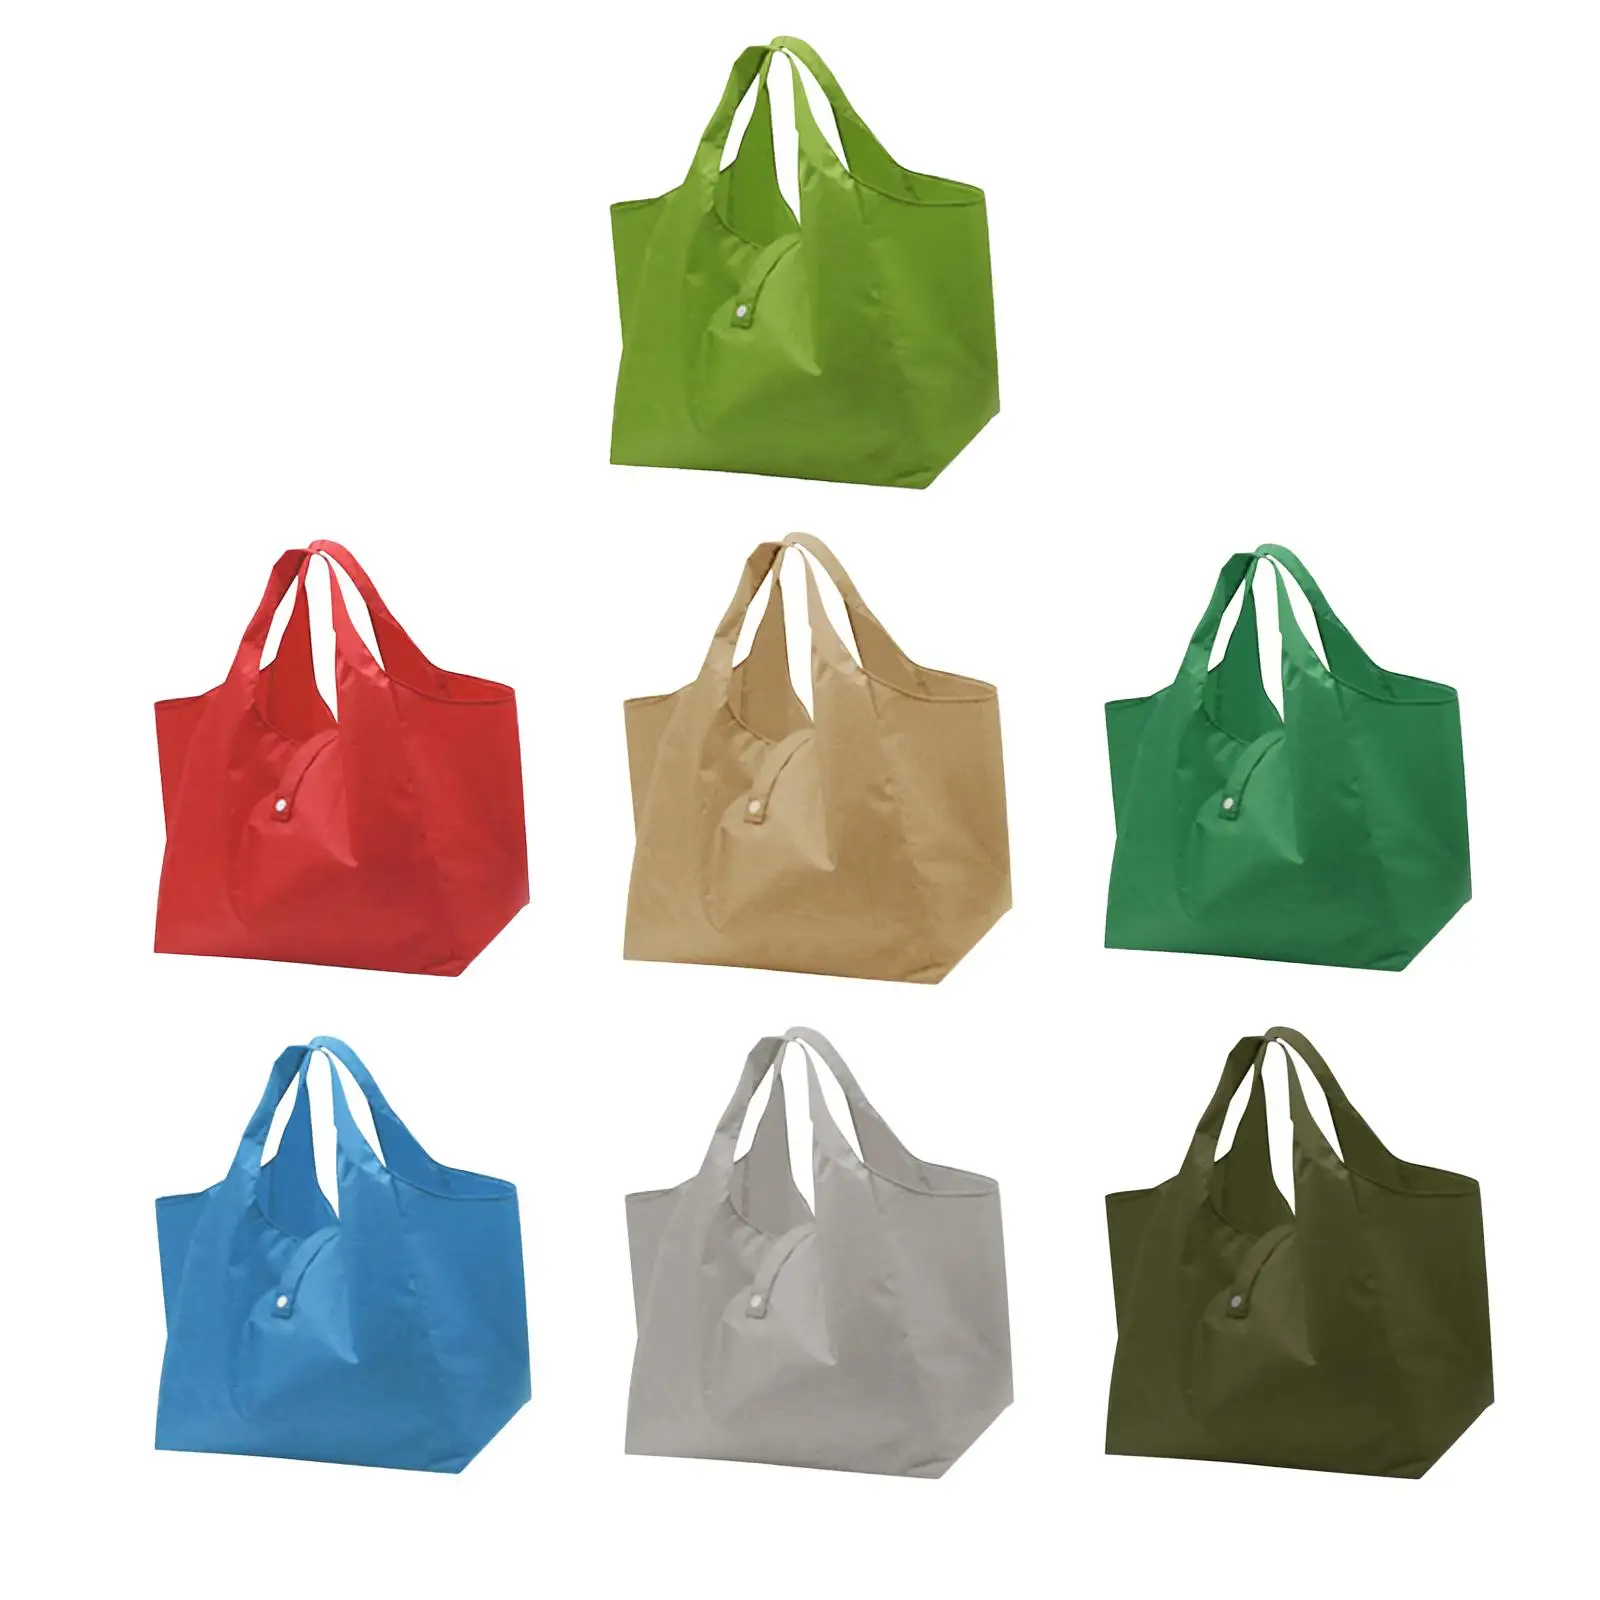 Reusable Grocery Shopping Bag, Folding Tote, Waterproof Washable Oxford Fabric Grocery Tote, Foldable Shopping Bag